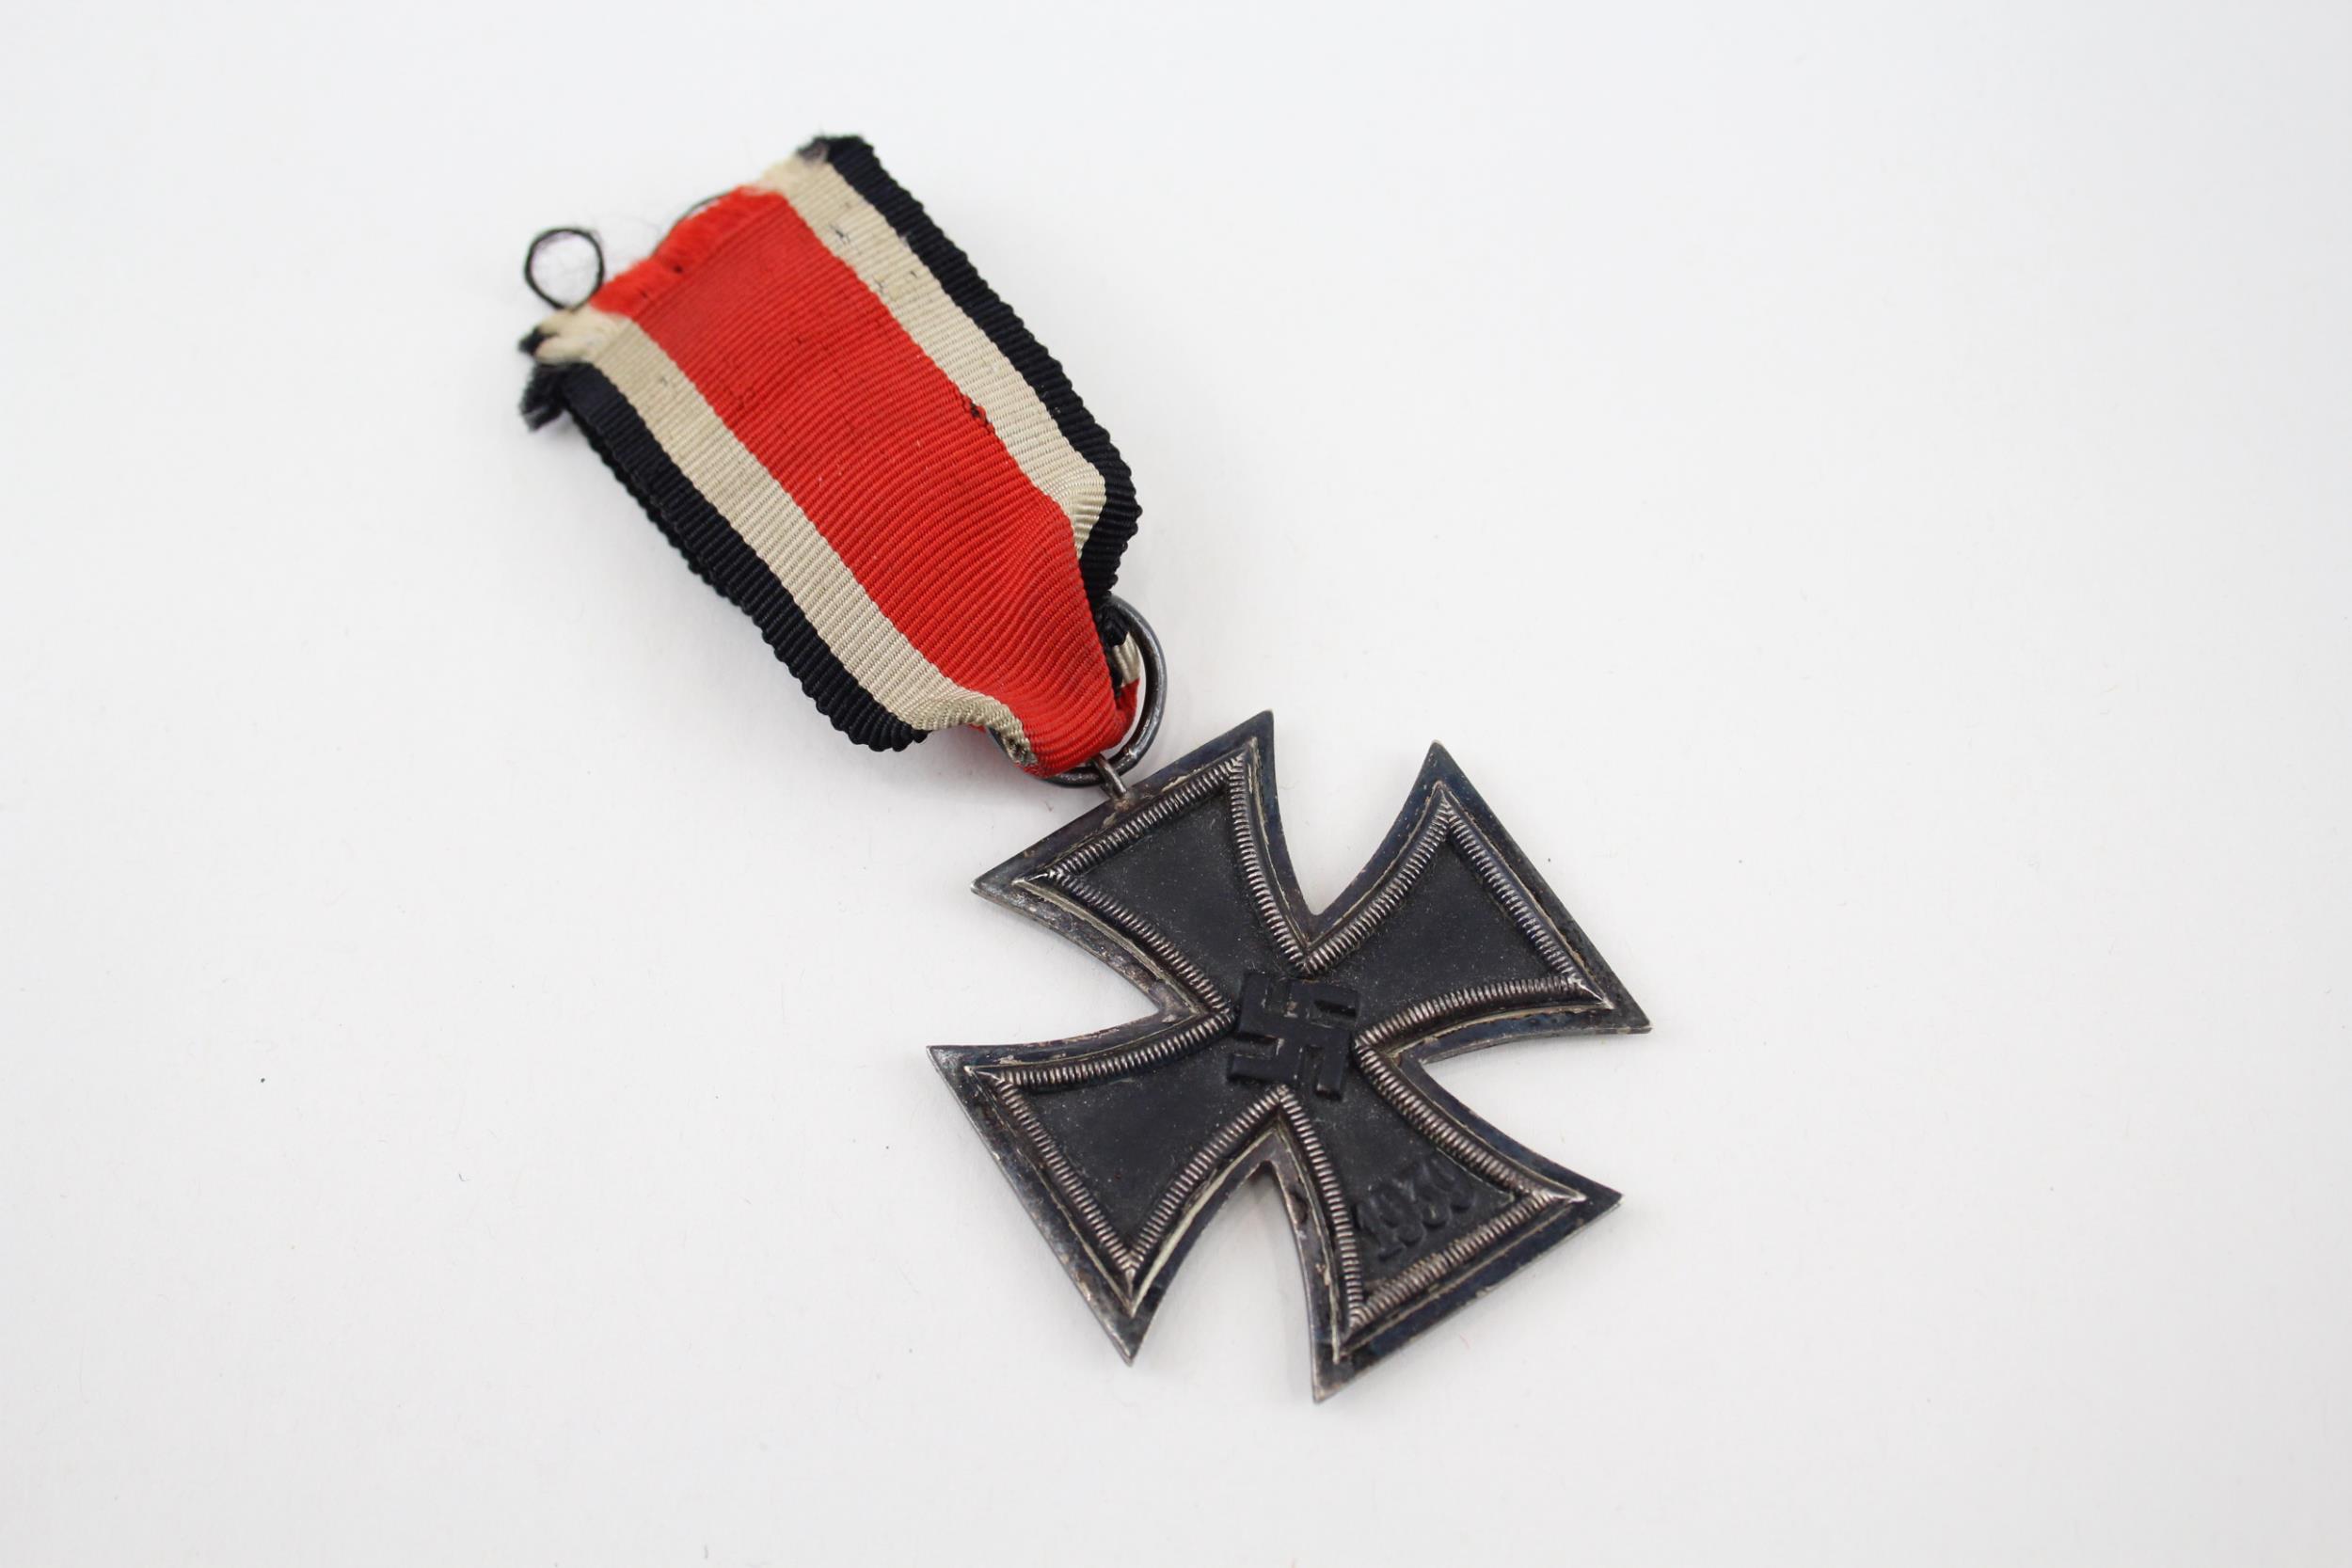 WW2 German Iron Cross 2nd Class - WW2 German Iron Cross 2nd Class In vintage condition Signs of